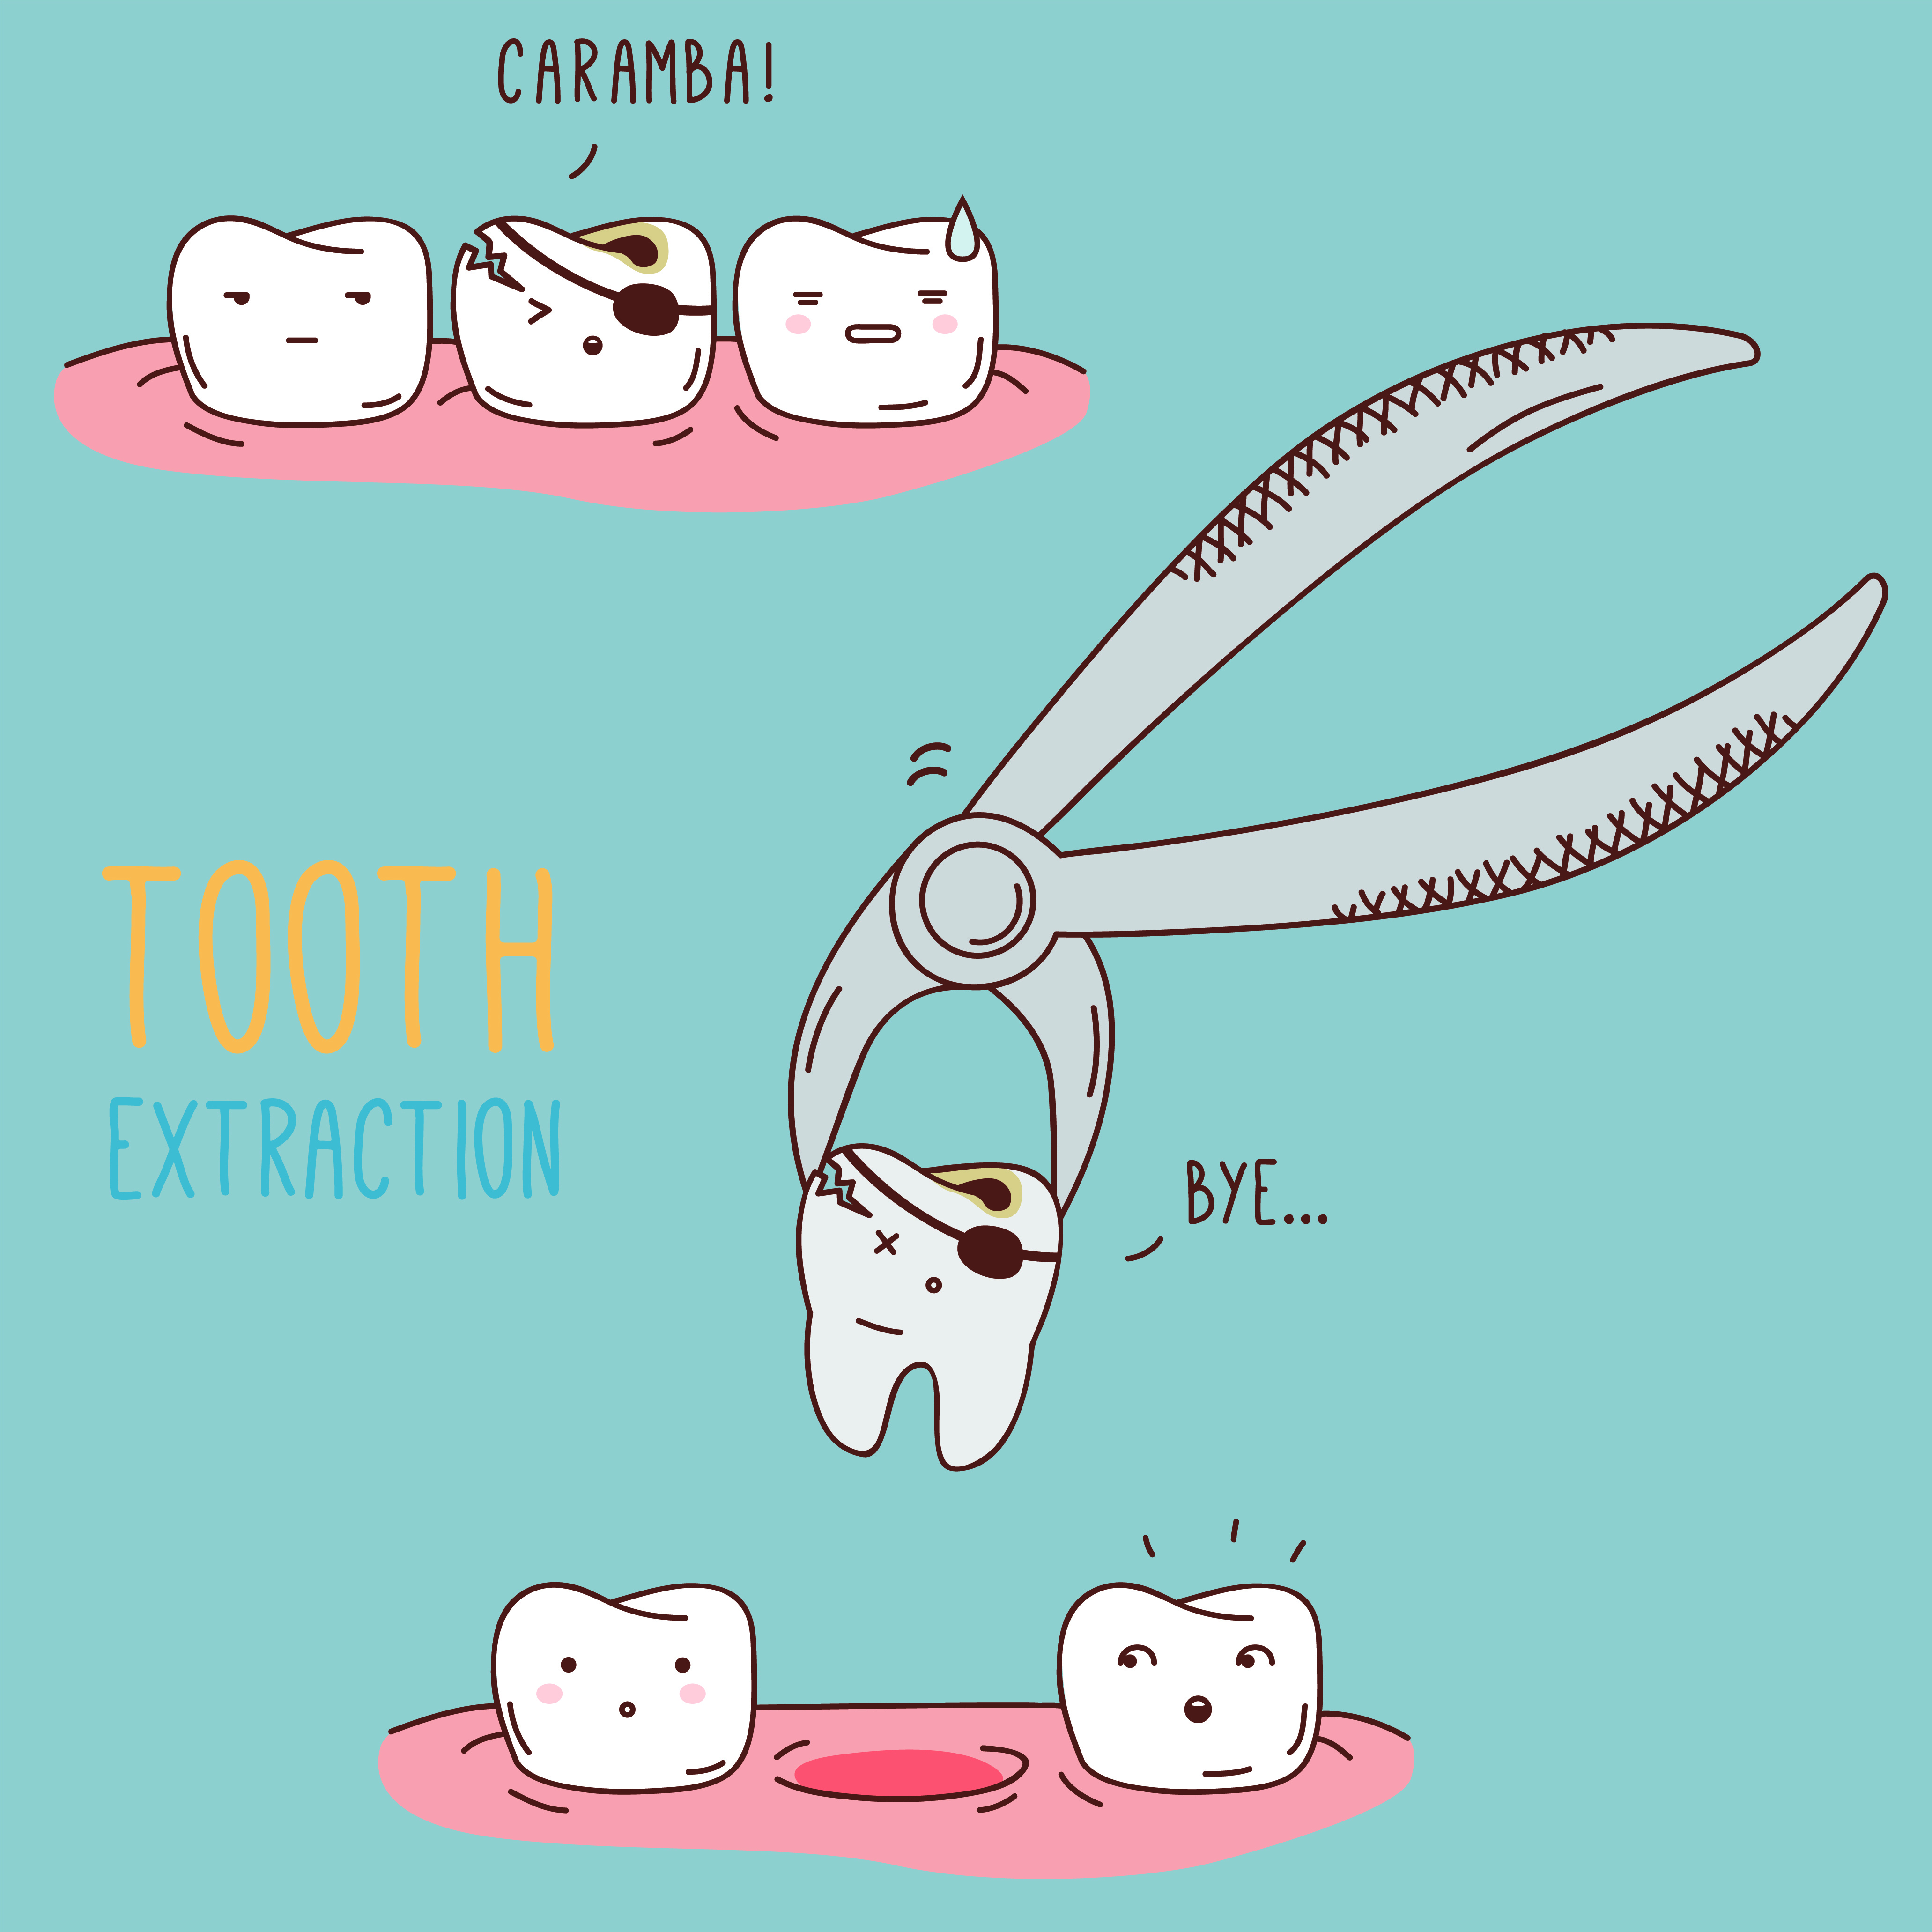 Tooth Extraction graphic from Dailley Dental Care 